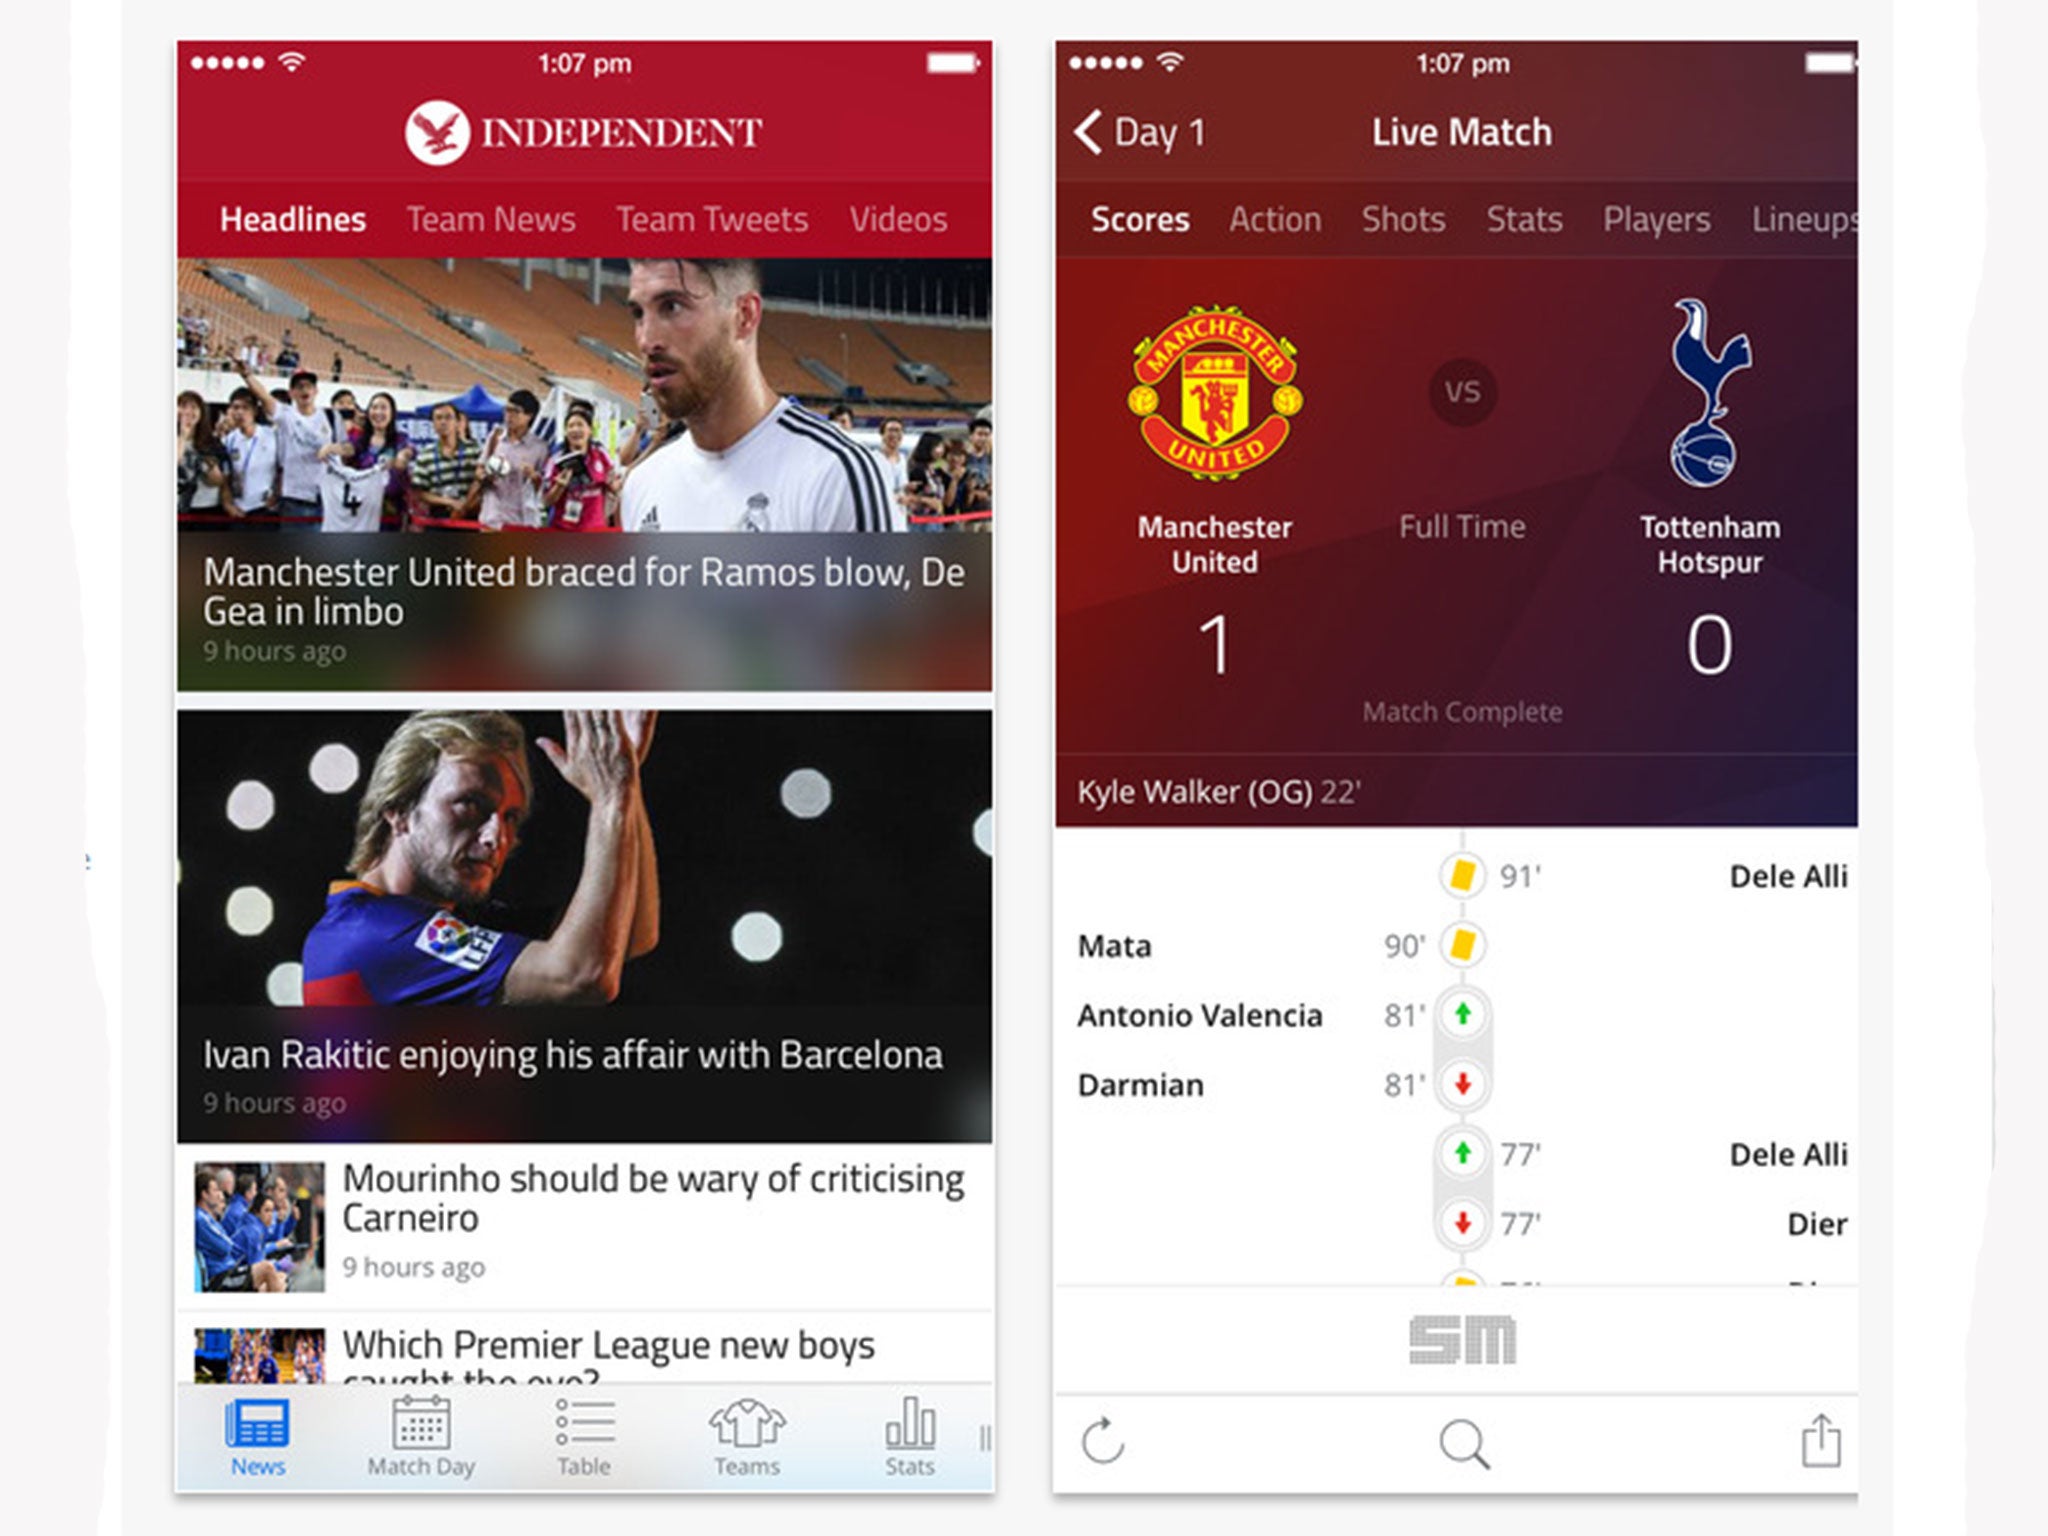 Independent Football Live The Independent launches new football app for the Premier League and much more The Independent The Independent